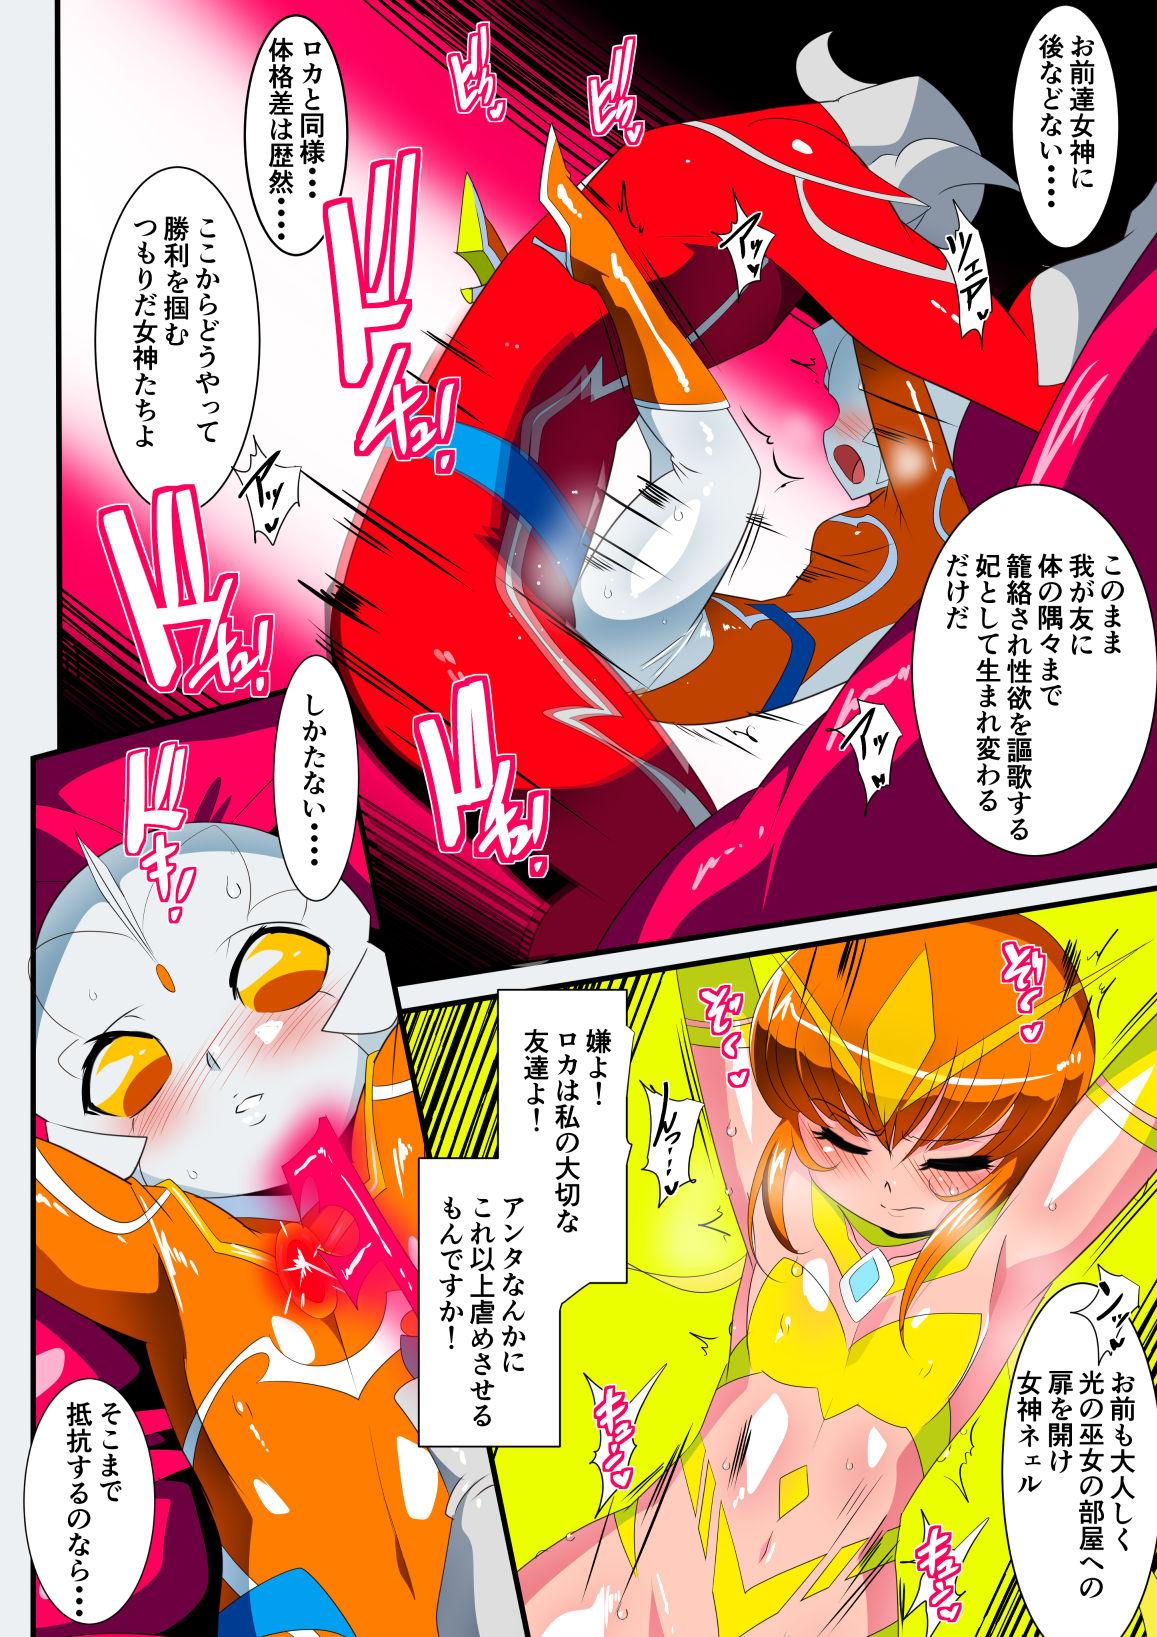 Private Sex Ginga no Megami Netise IX - Ultraman High Definition - Page 6